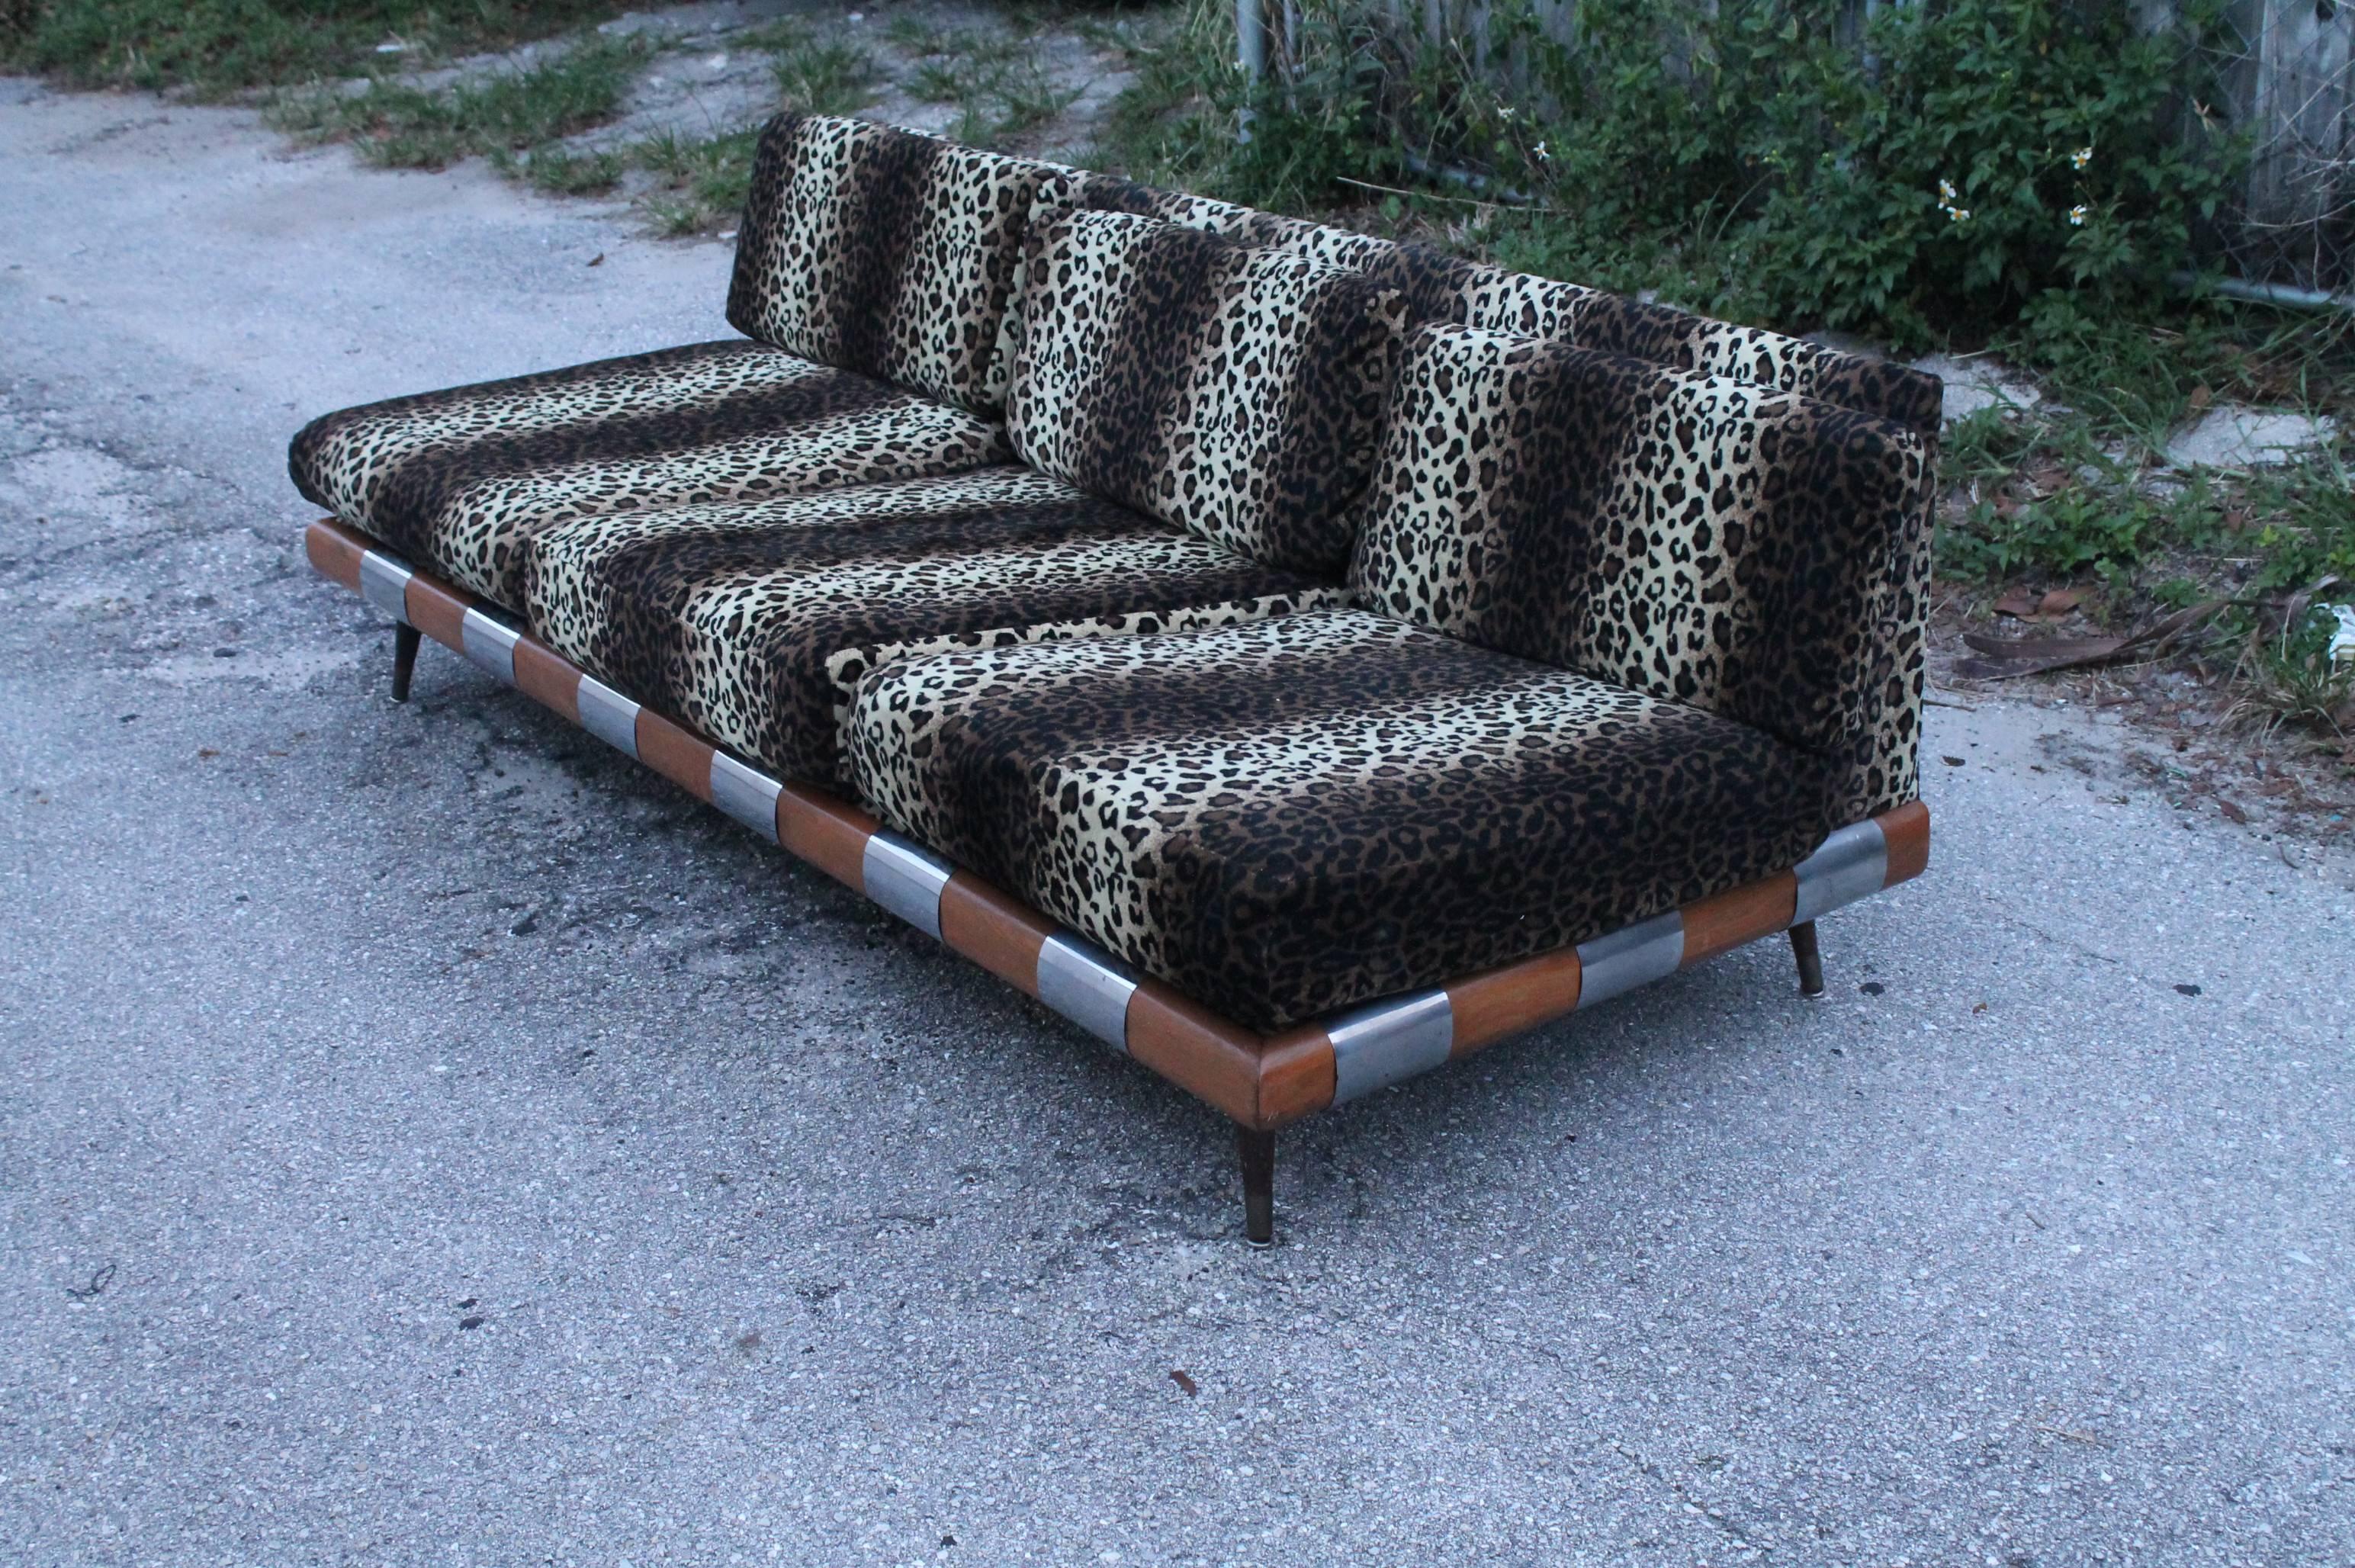 Great vintage Mid-Century Modern sofa by Adrian Pearsall for Craft Associates by Lane (Tag is present and pictured) The fabric is as found in good vintage condition. Chrome and walnut low base with pegs legs. Six removeable cushions.
